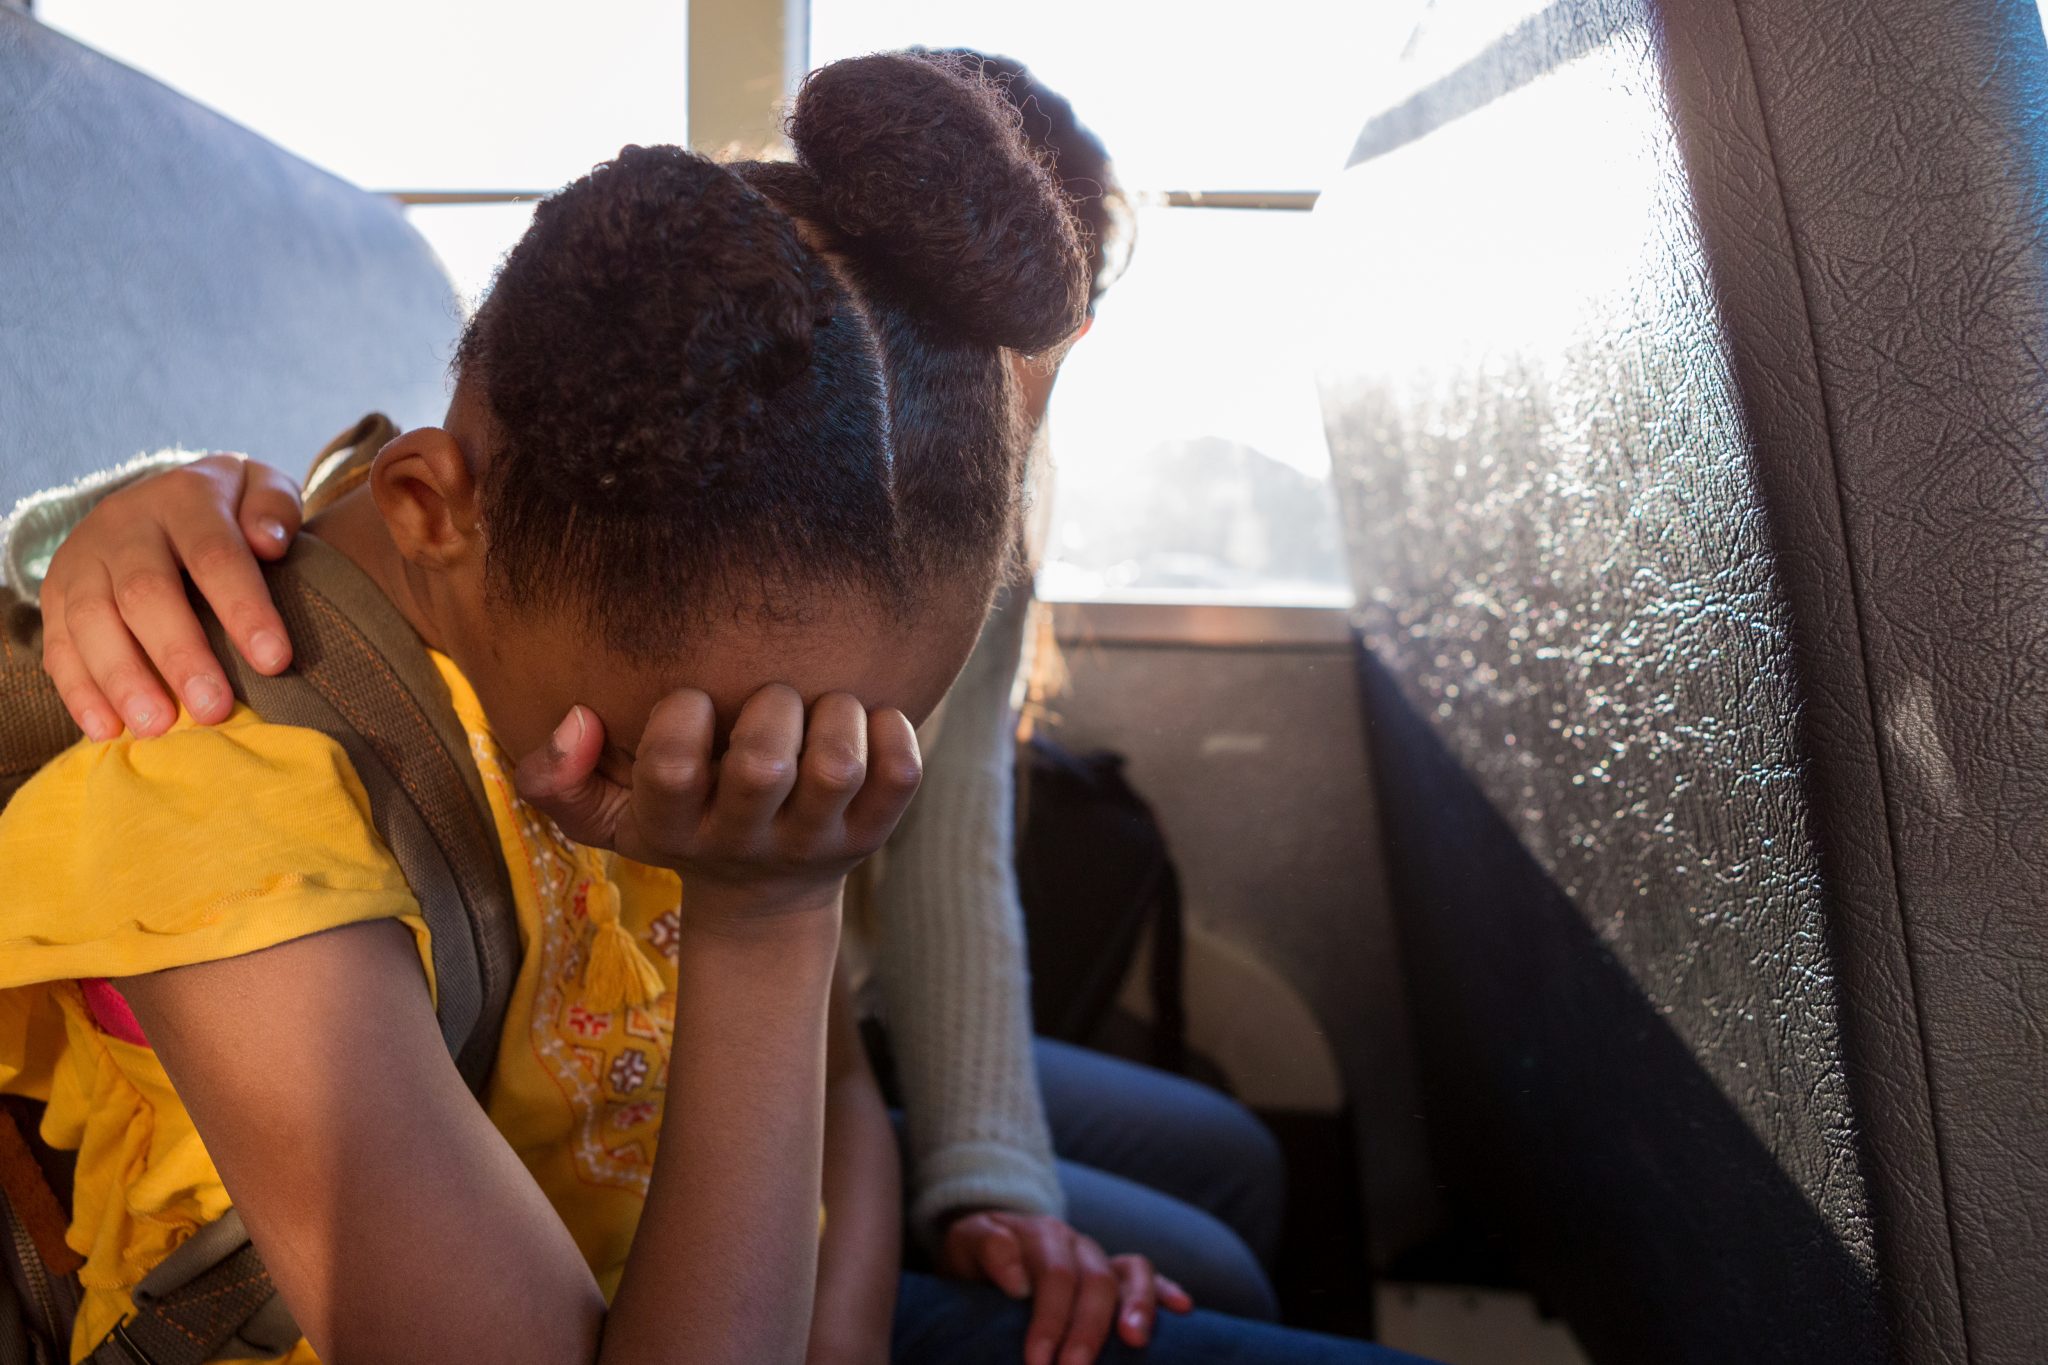 A young girl crying on a bus